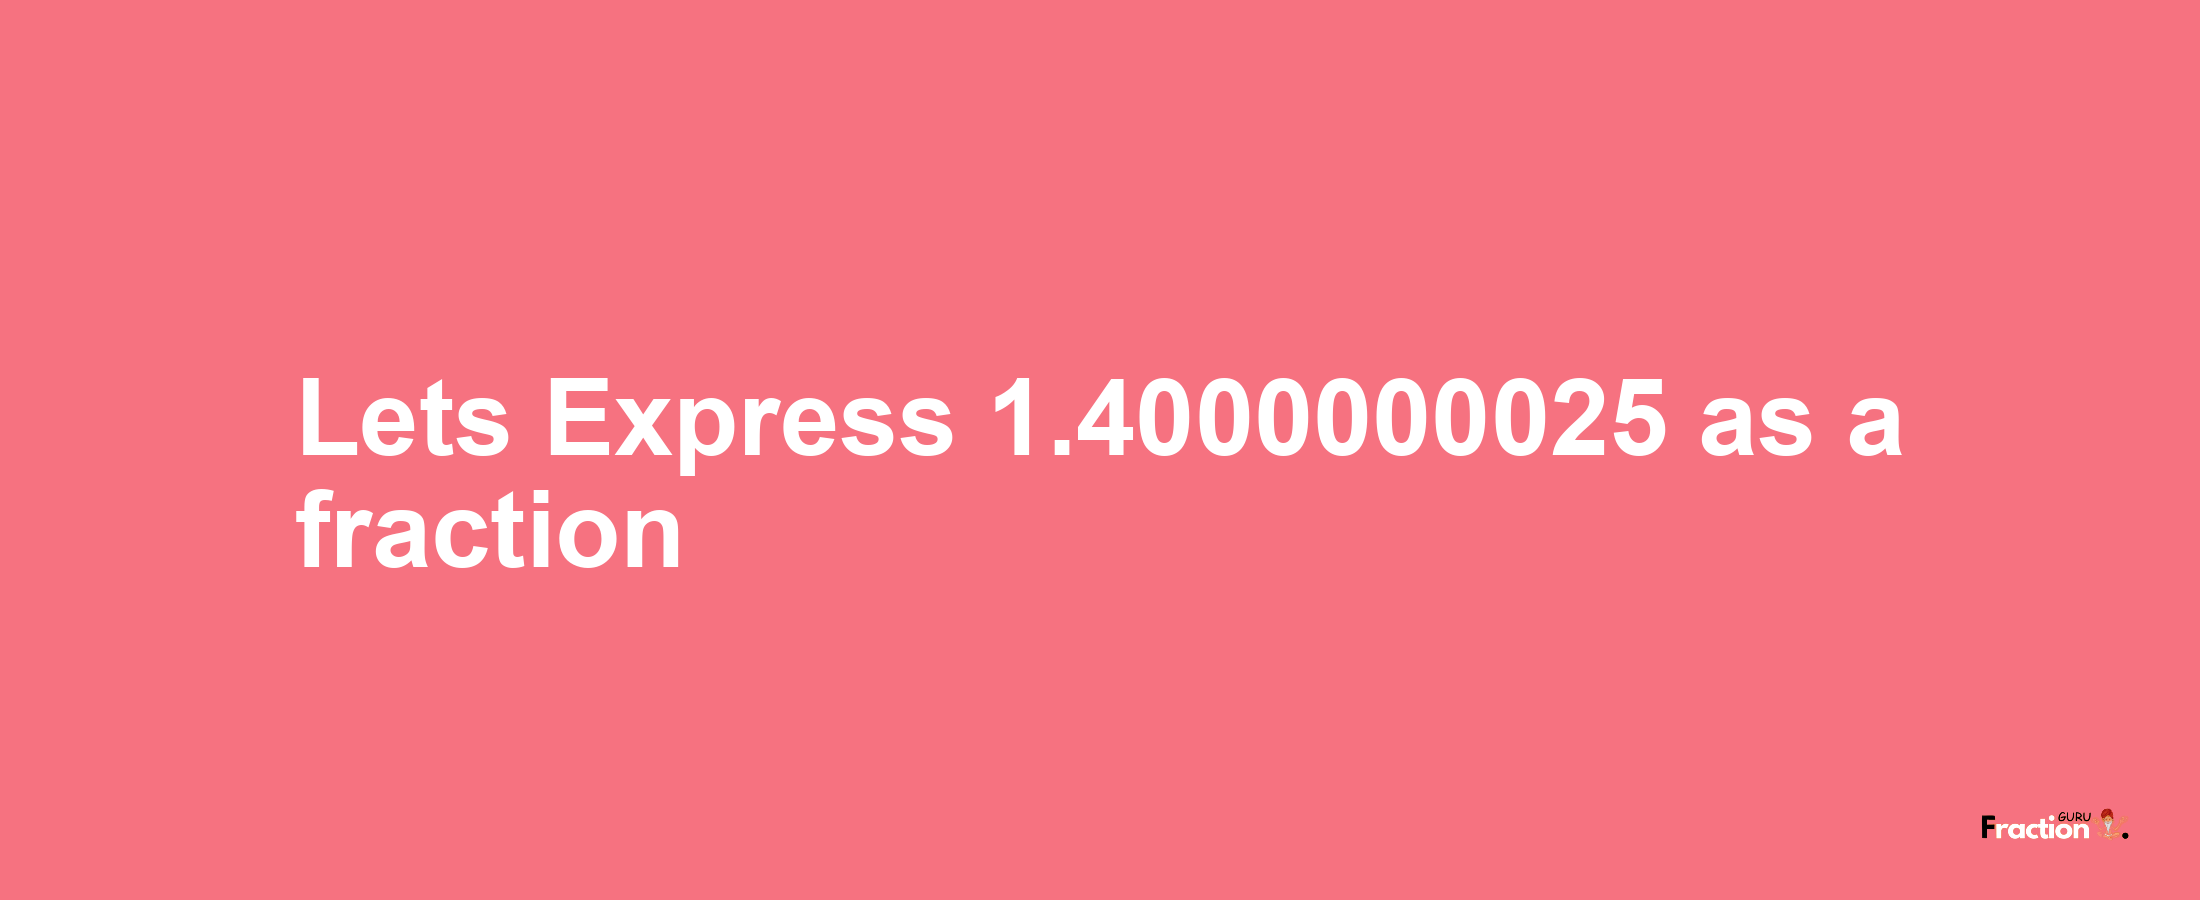 Lets Express 1.4000000025 as afraction